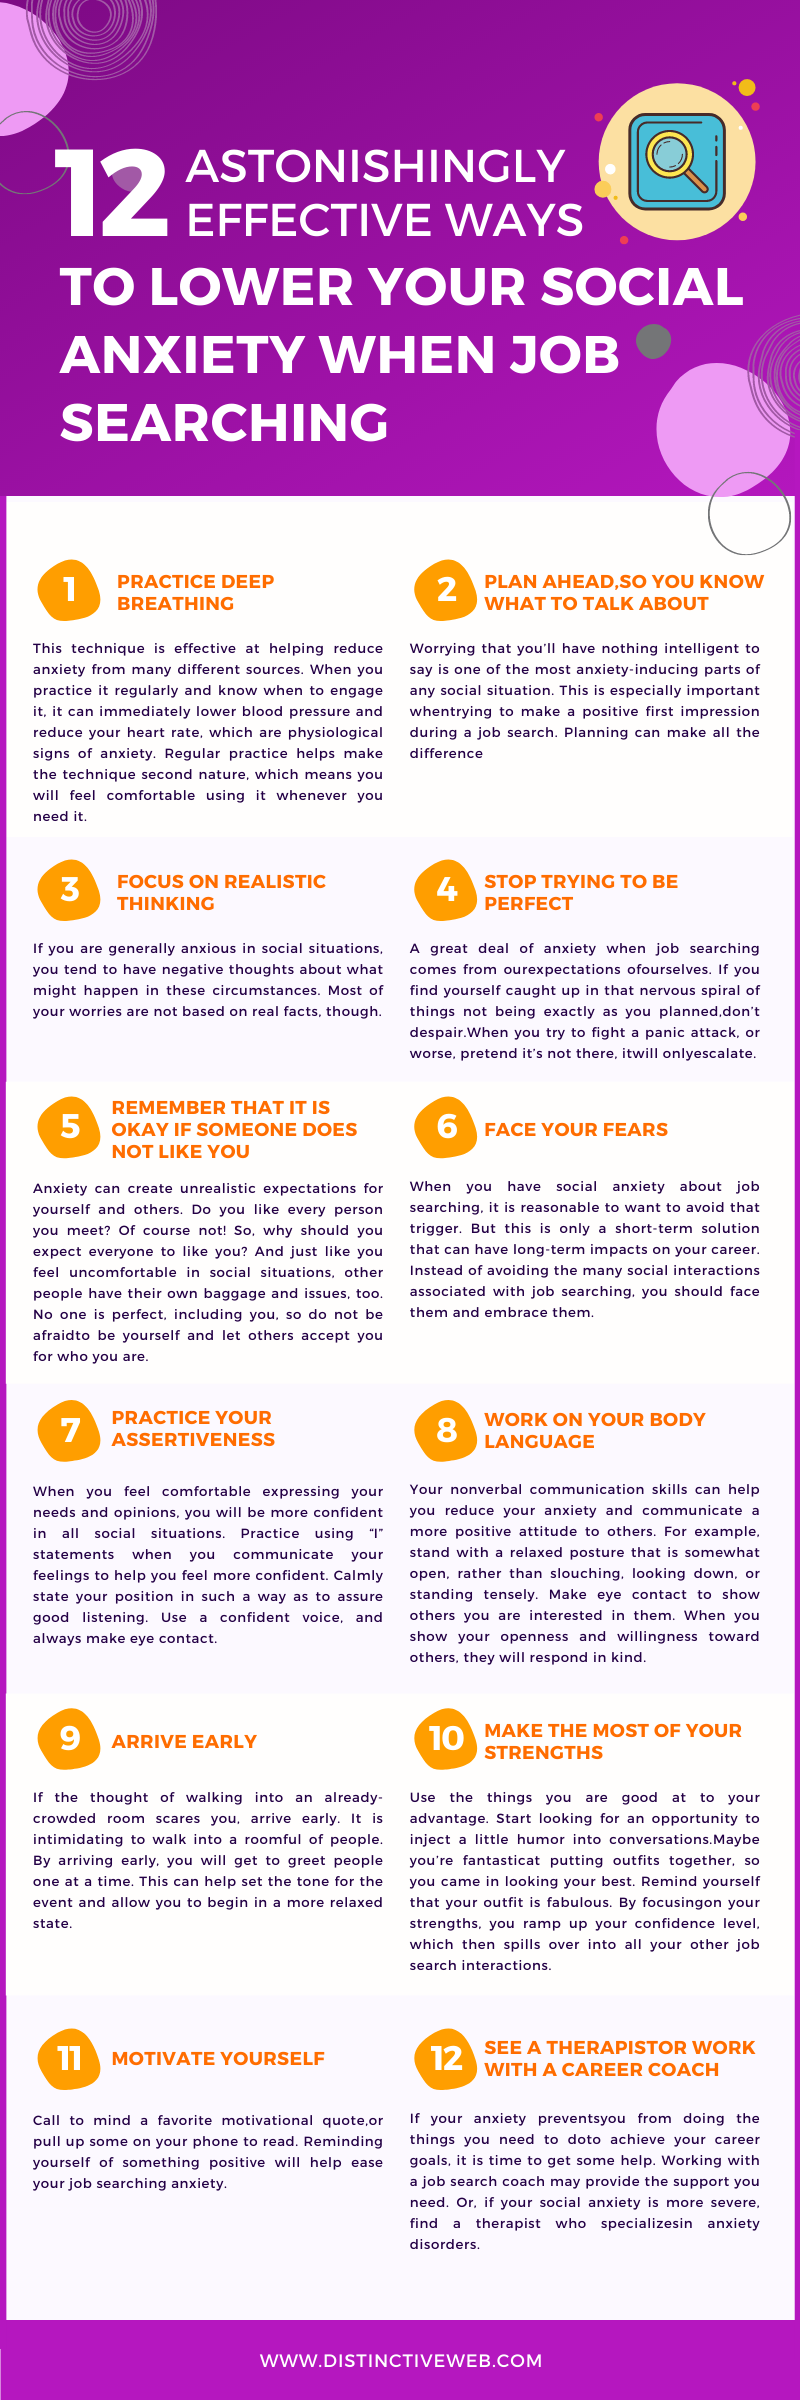 12 ways to lower social anxiety when job searching infographic